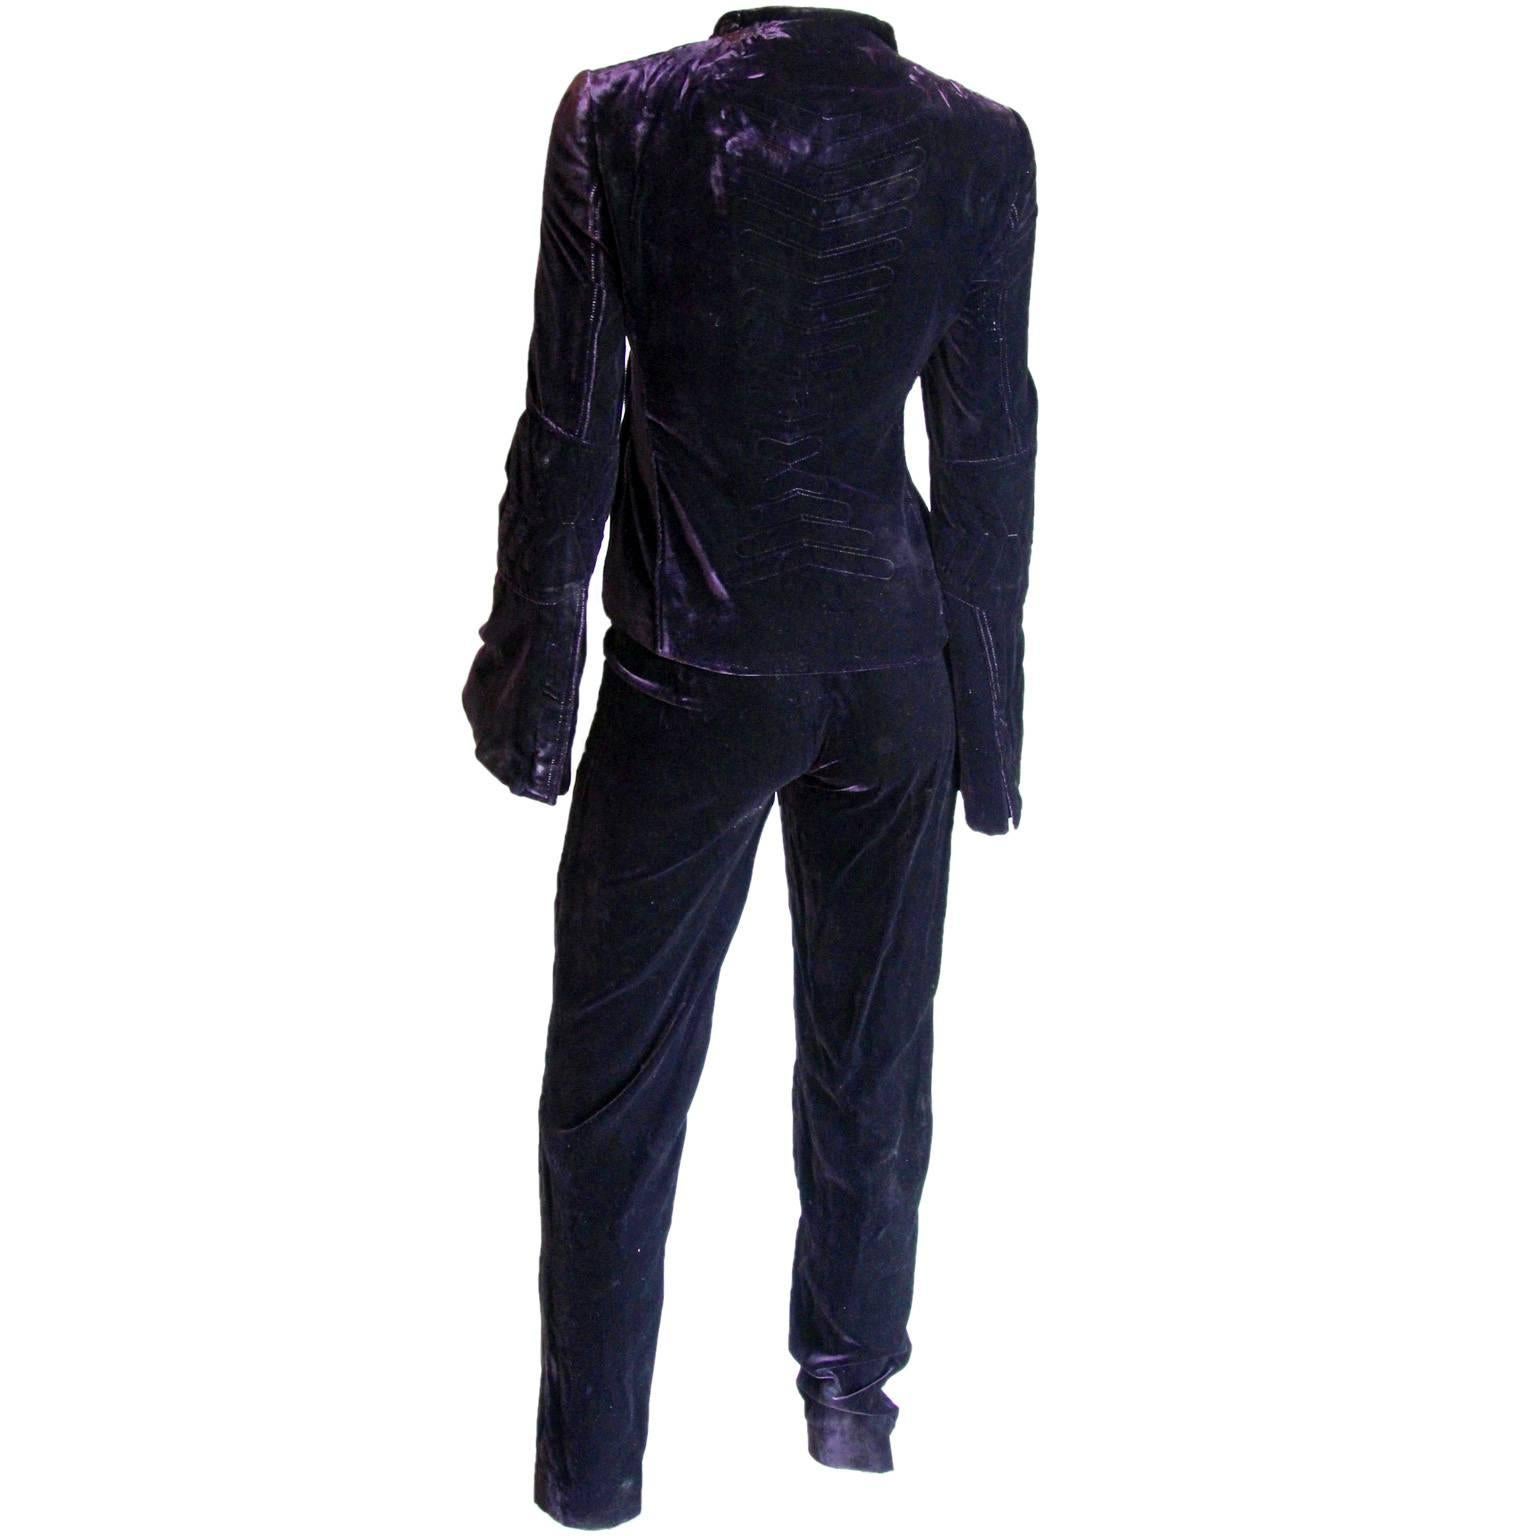 Rare & Iconic Aubergine Velvet Tom Ford For Gucci Fall Winter 2004 Jacket & Pants Suit In Italian Size 44/42 With Second Pair Of Pants!

Who could ever forget Tom Ford's incredible swansong for Gucci, way back in 2004? This simply heavenly